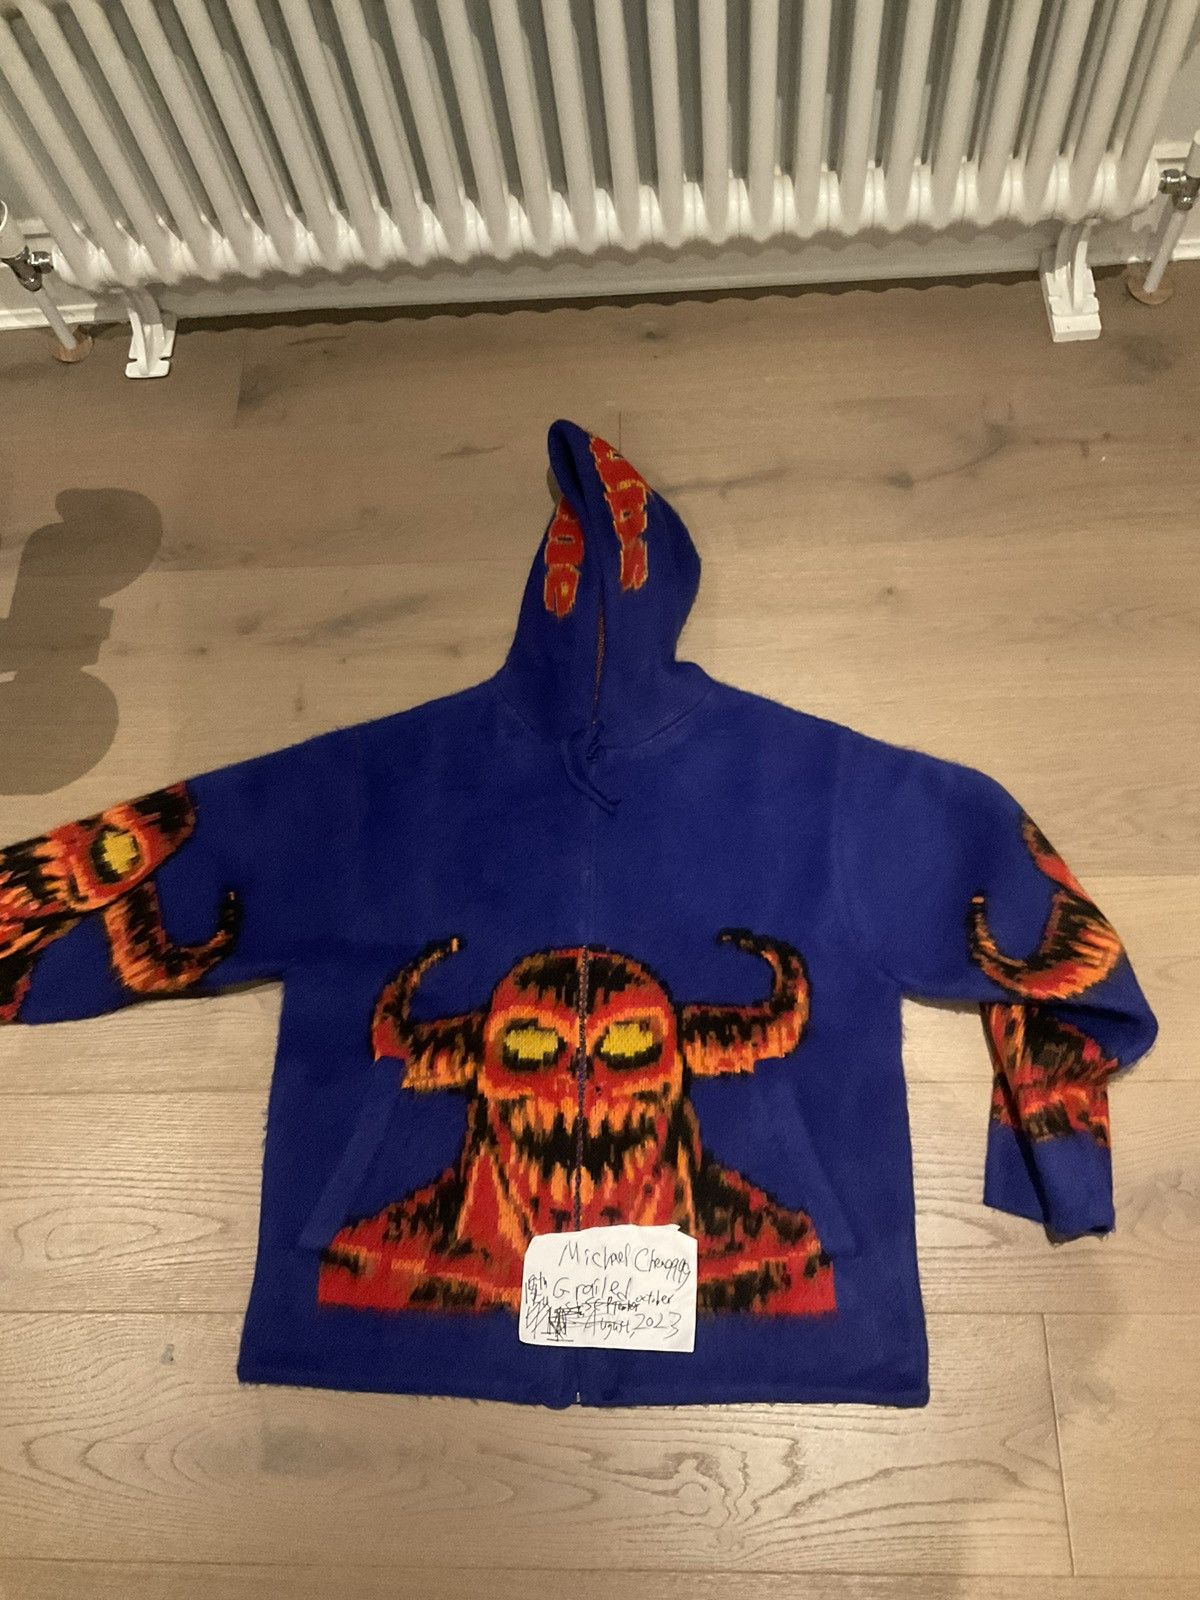 Supreme Supreme toy machine zip up hooded sweater blue | Grailed